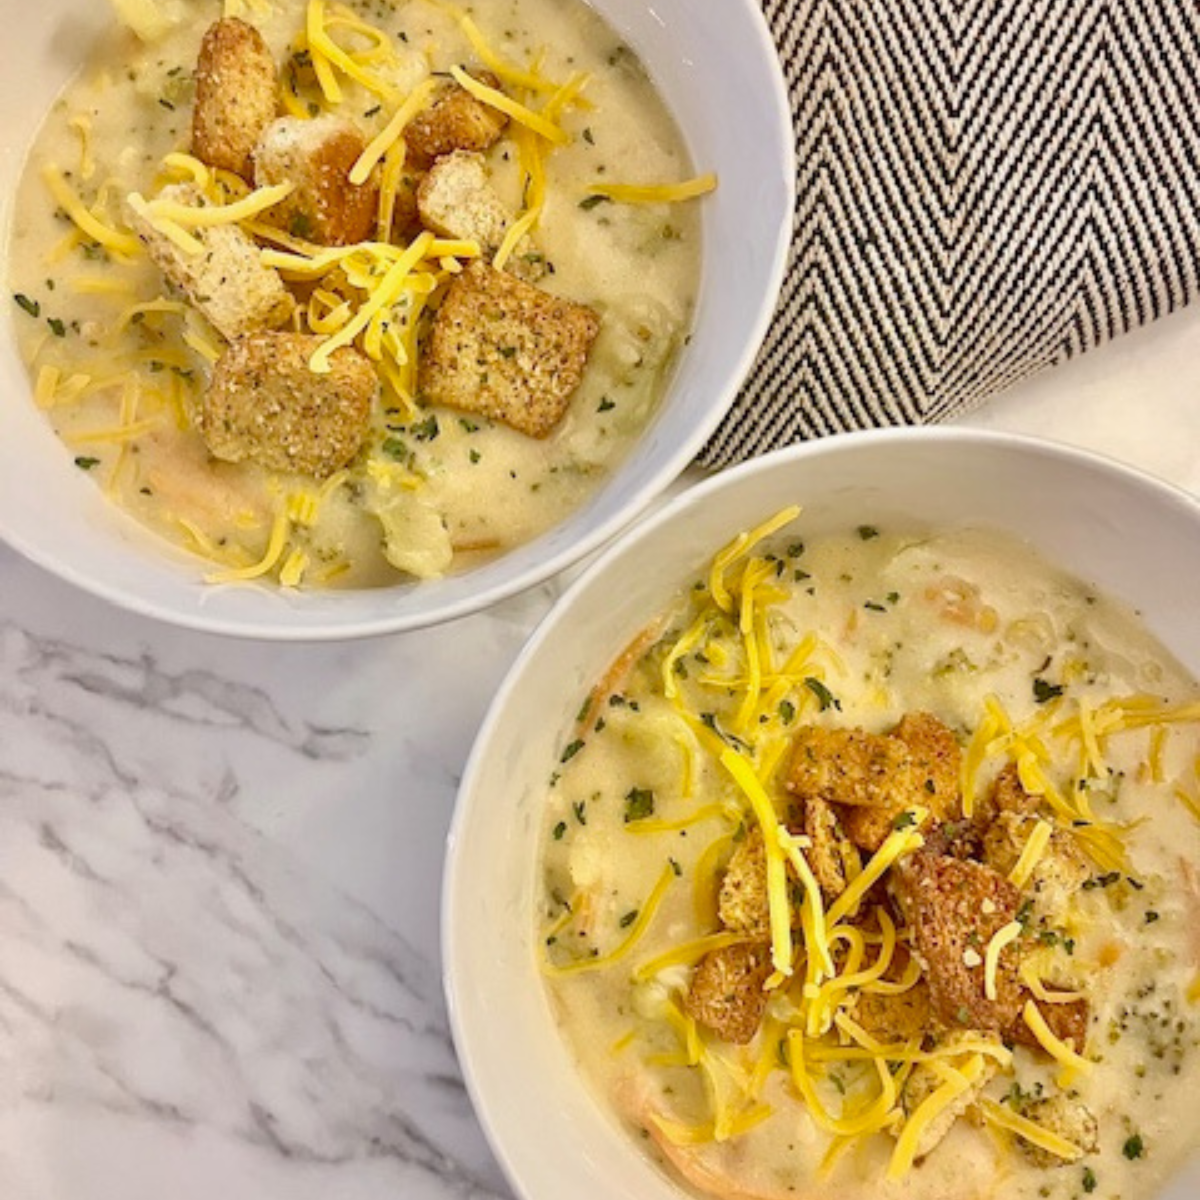 Overhead image of two bowls of broccoli cheddar soup